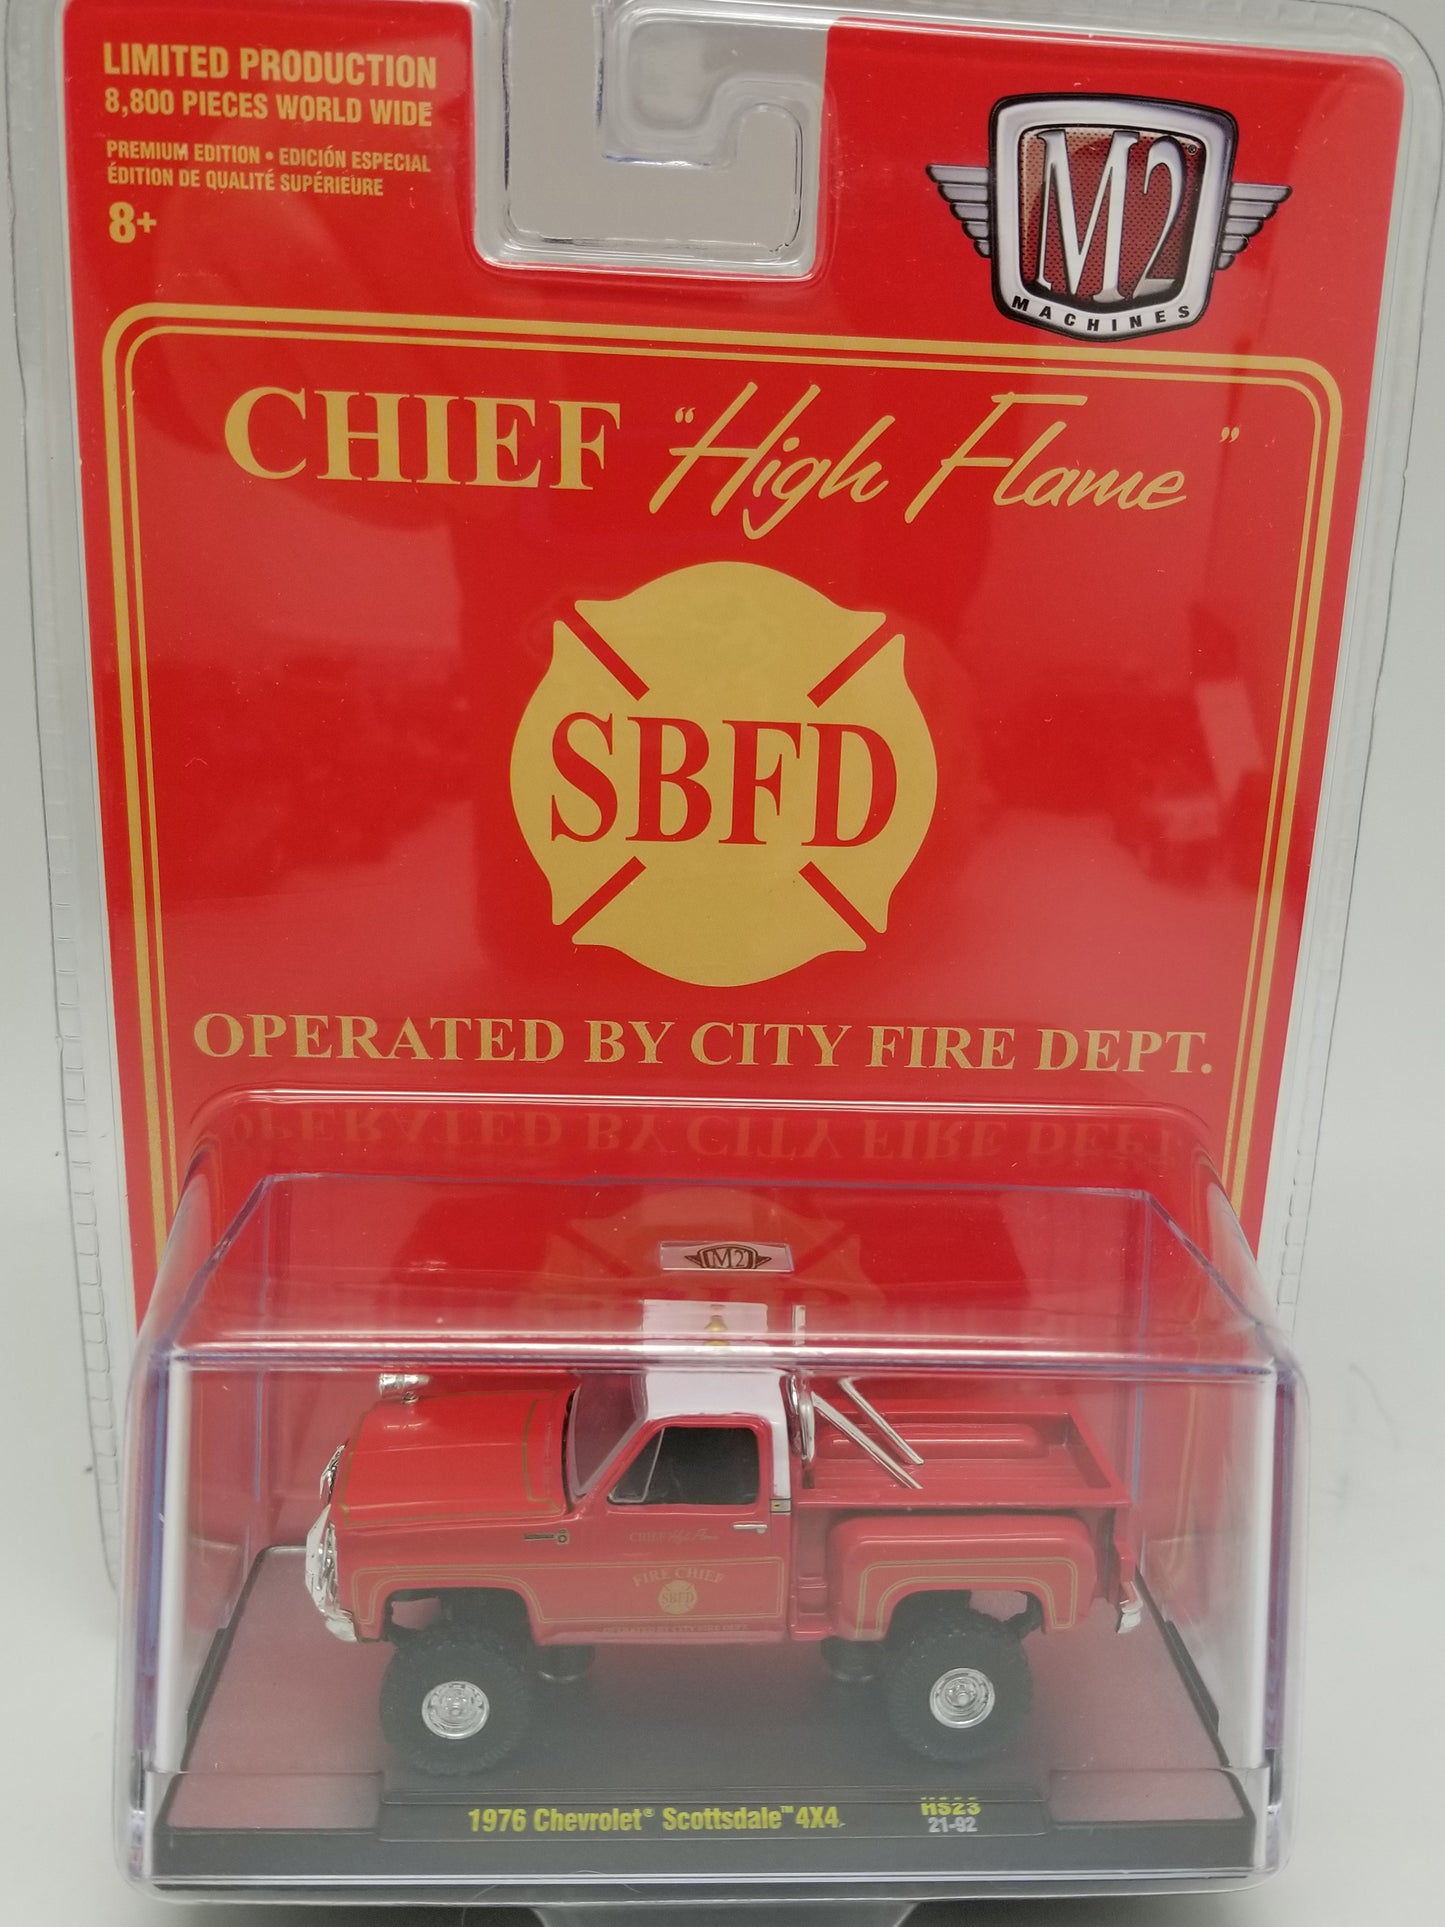 M2 1976 Chevrolet Scottsdale 4x4 - Chief "High Flame" SBFD